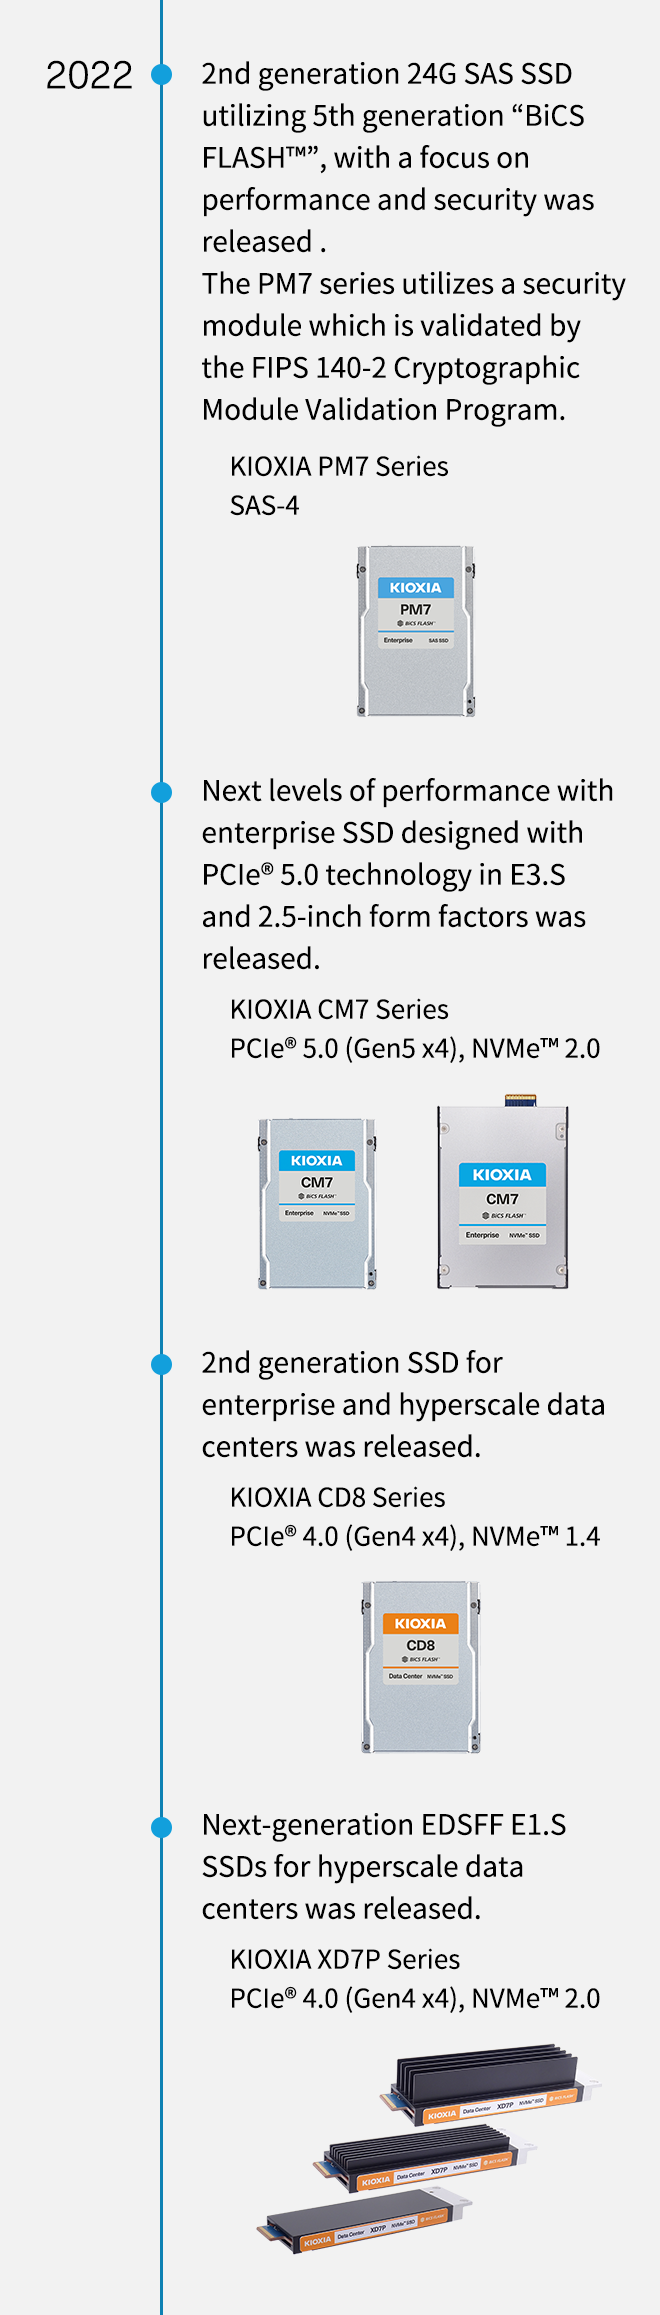 2022. 2nd generation 24G SAS SSD utilizing 5th generation “BiCS FLASH™”, with a focus on performance and security was released . The PM7 series utilizes a security module which is validated by the FIPS 140-2 Cryptographic Module Validation Program. KIOXIA PM7 Series SAS-4. Next levels of performance with enterprise SSD designed with PCIe® 5.0 technology in E3.S and 2.5-inch form factors was released. KIOXIA CM7 Series PCIe® 5.0 (Gen5 x4), NVMe™ 2.0. 2nd generation SSD for enterprise and hyperscale data centers was released. KIOXIA CD8 Series PCIe® 4.0 (Gen4 x4), NVMe™ 1.4. Next-generation EDSFF E1.S SSDs for hyperscale data centers was released. KIOXIA XD7P Series PCIe® 4.0 (Gen4 x4), NVMe™ 2.0